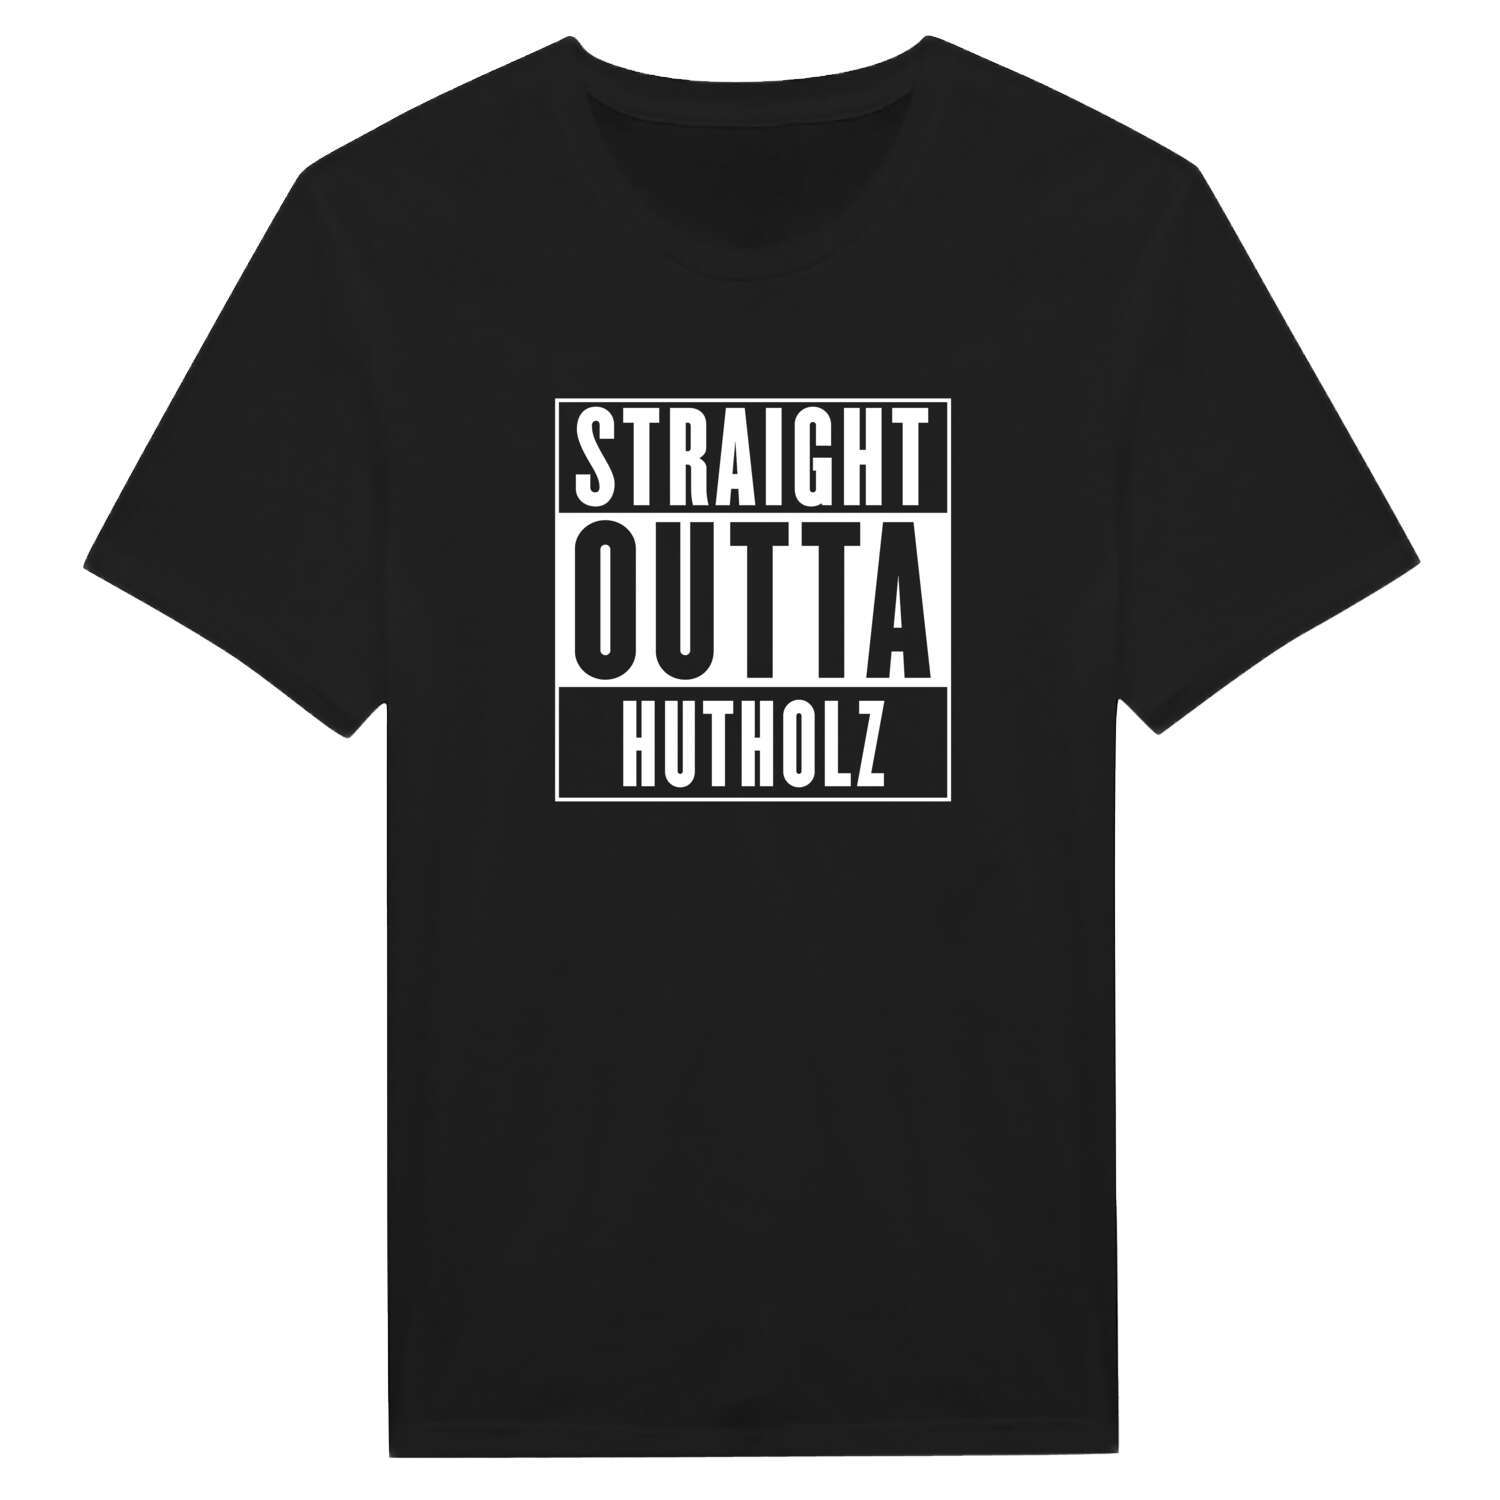 Hutholz T-Shirt »Straight Outta«